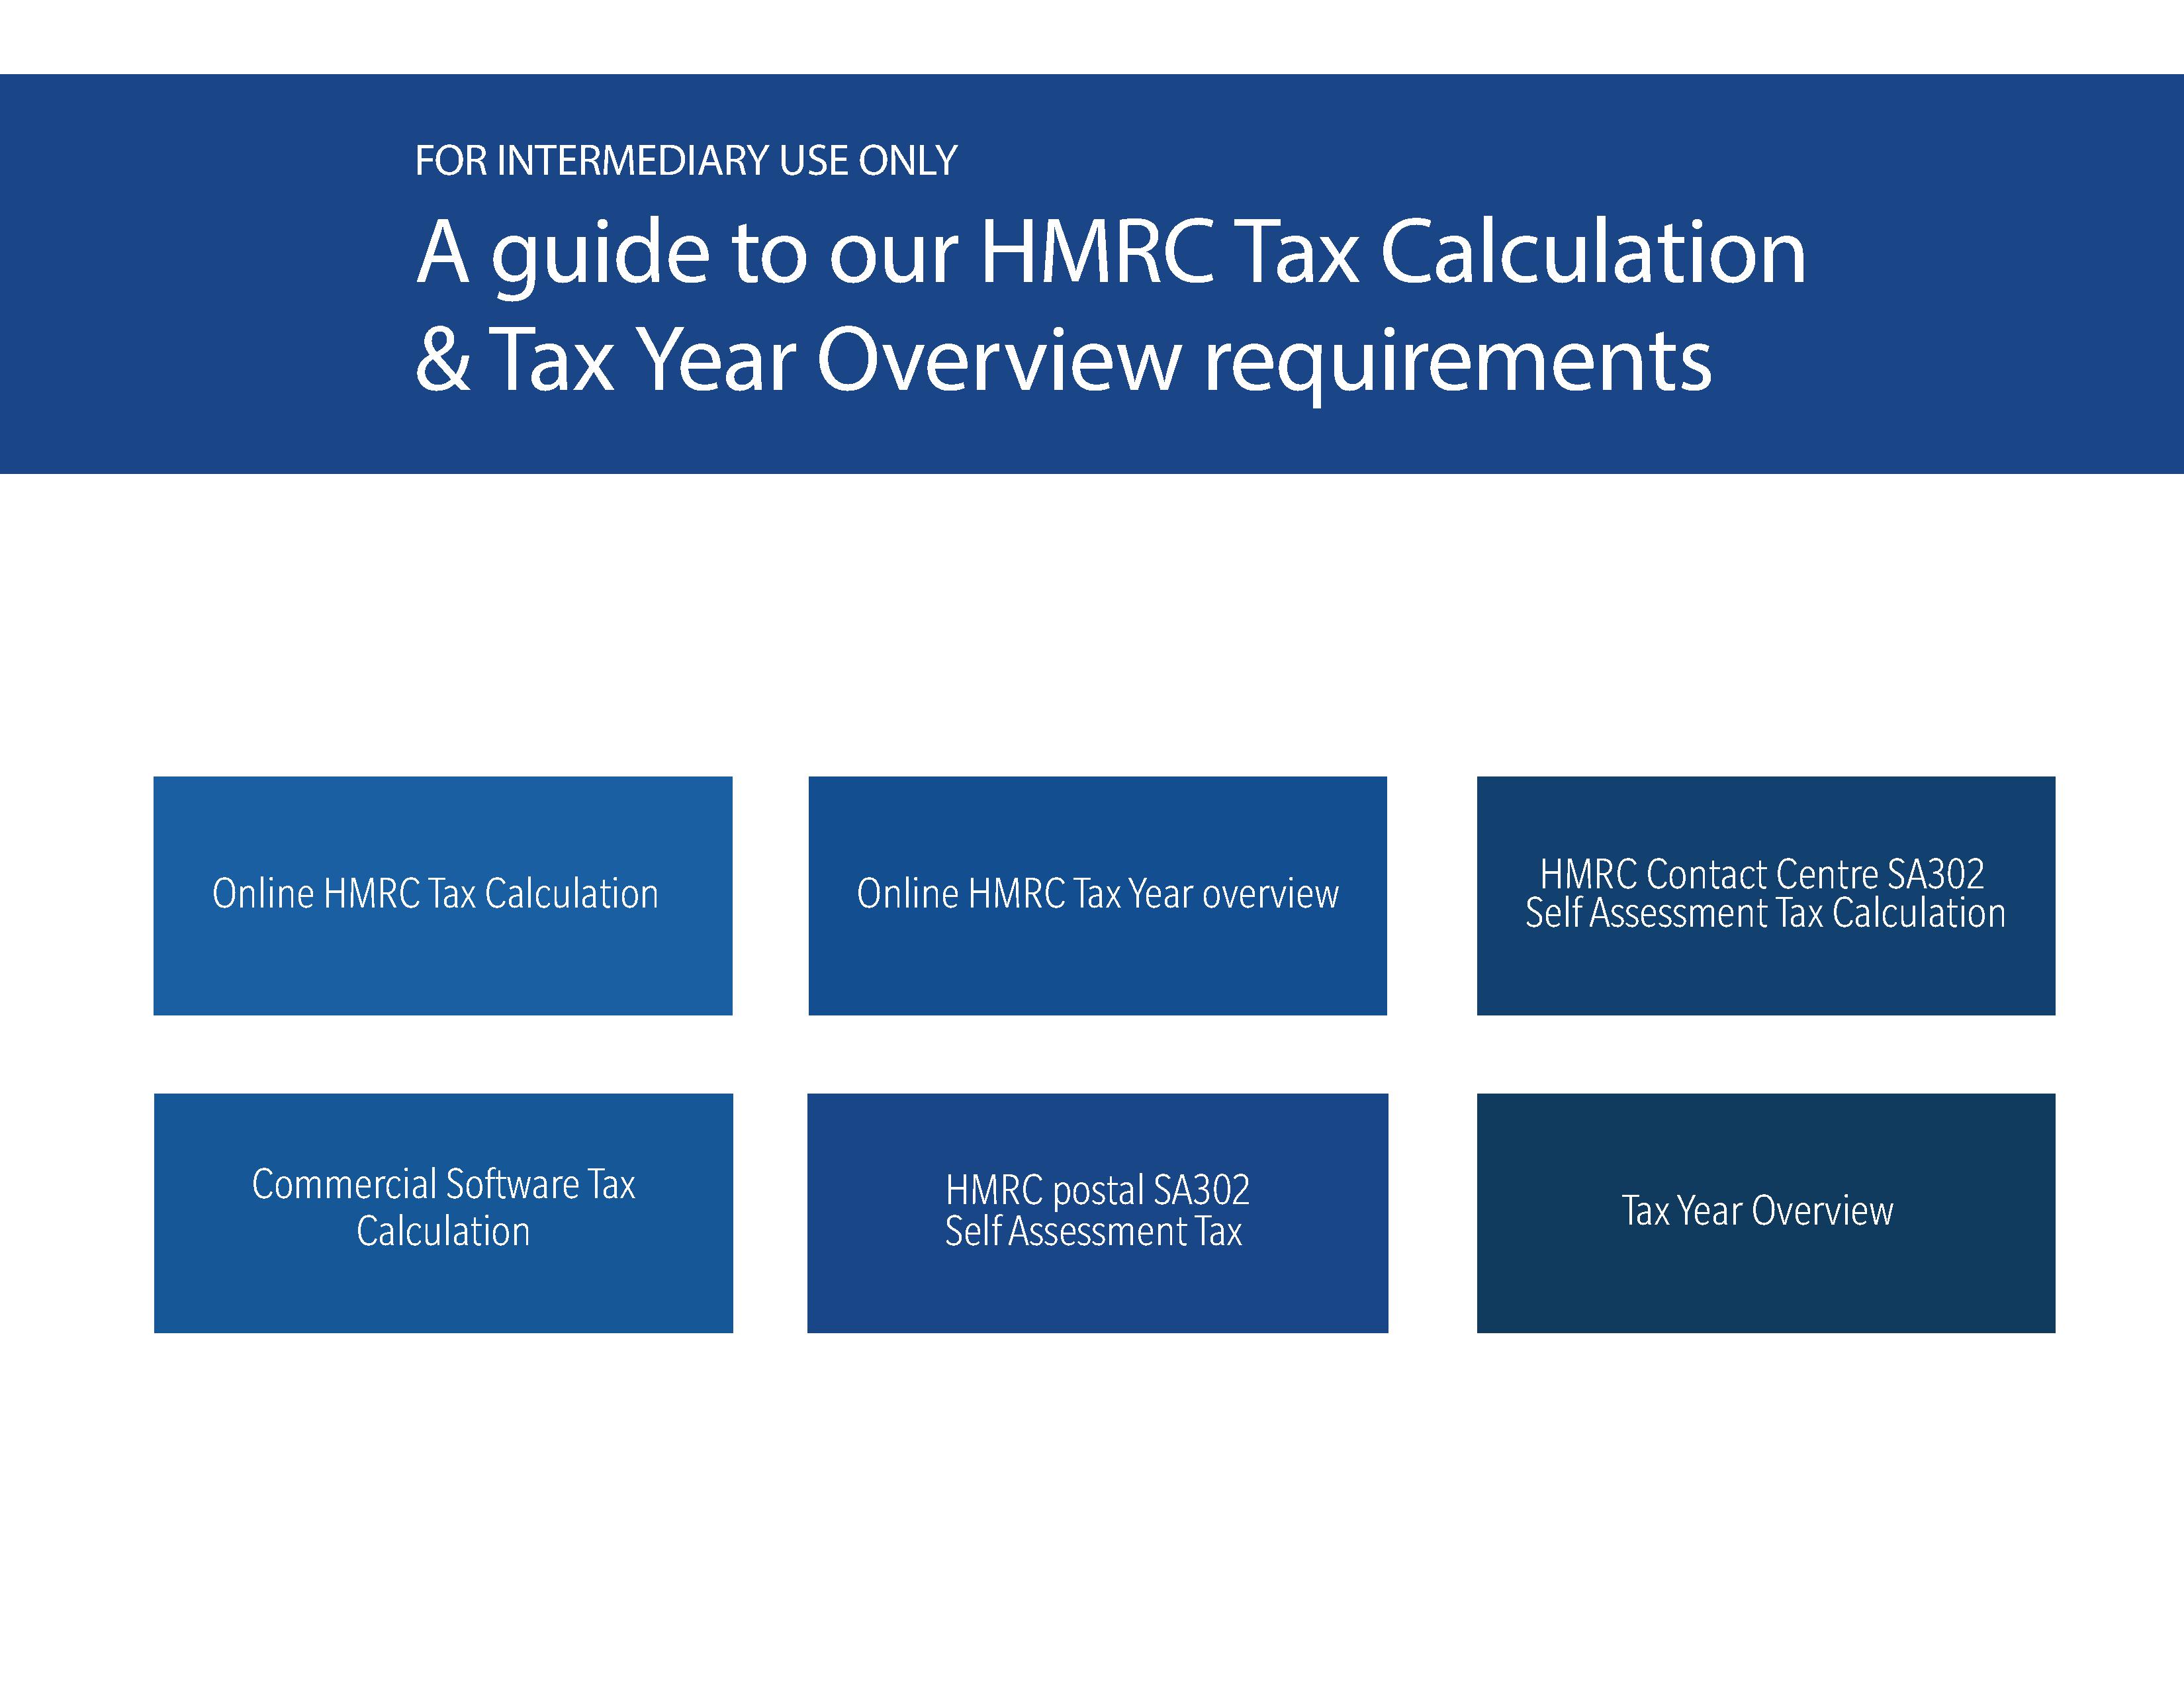 a-guide-to-our-hmrc-tax-calculation-tax-year-overview-requirements